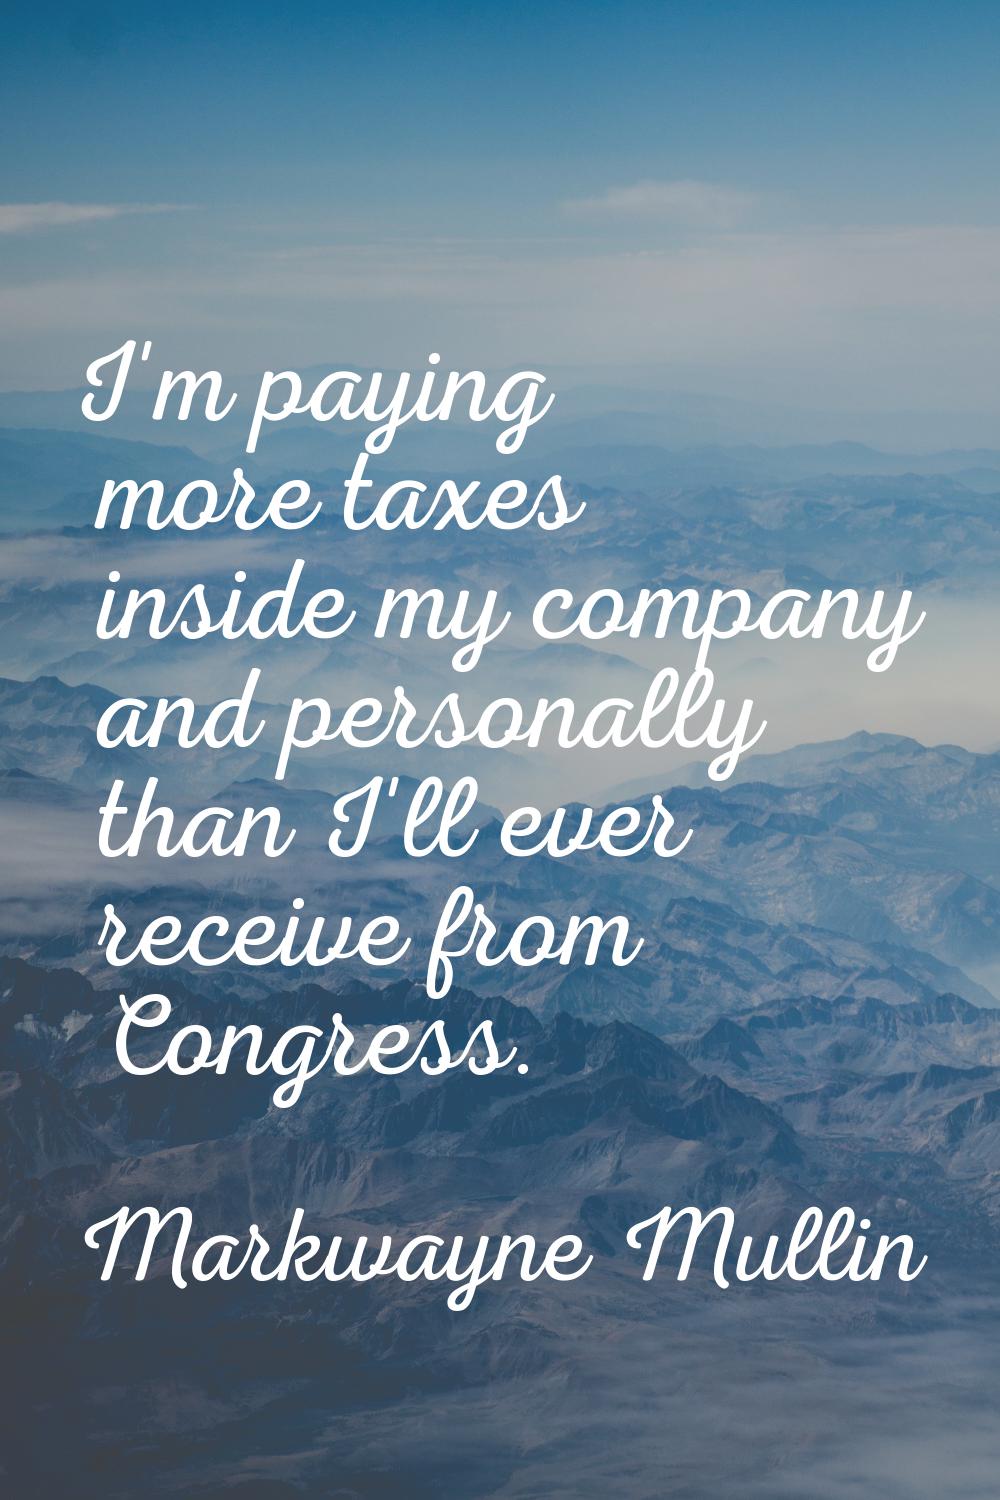 I'm paying more taxes inside my company and personally than I'll ever receive from Congress.